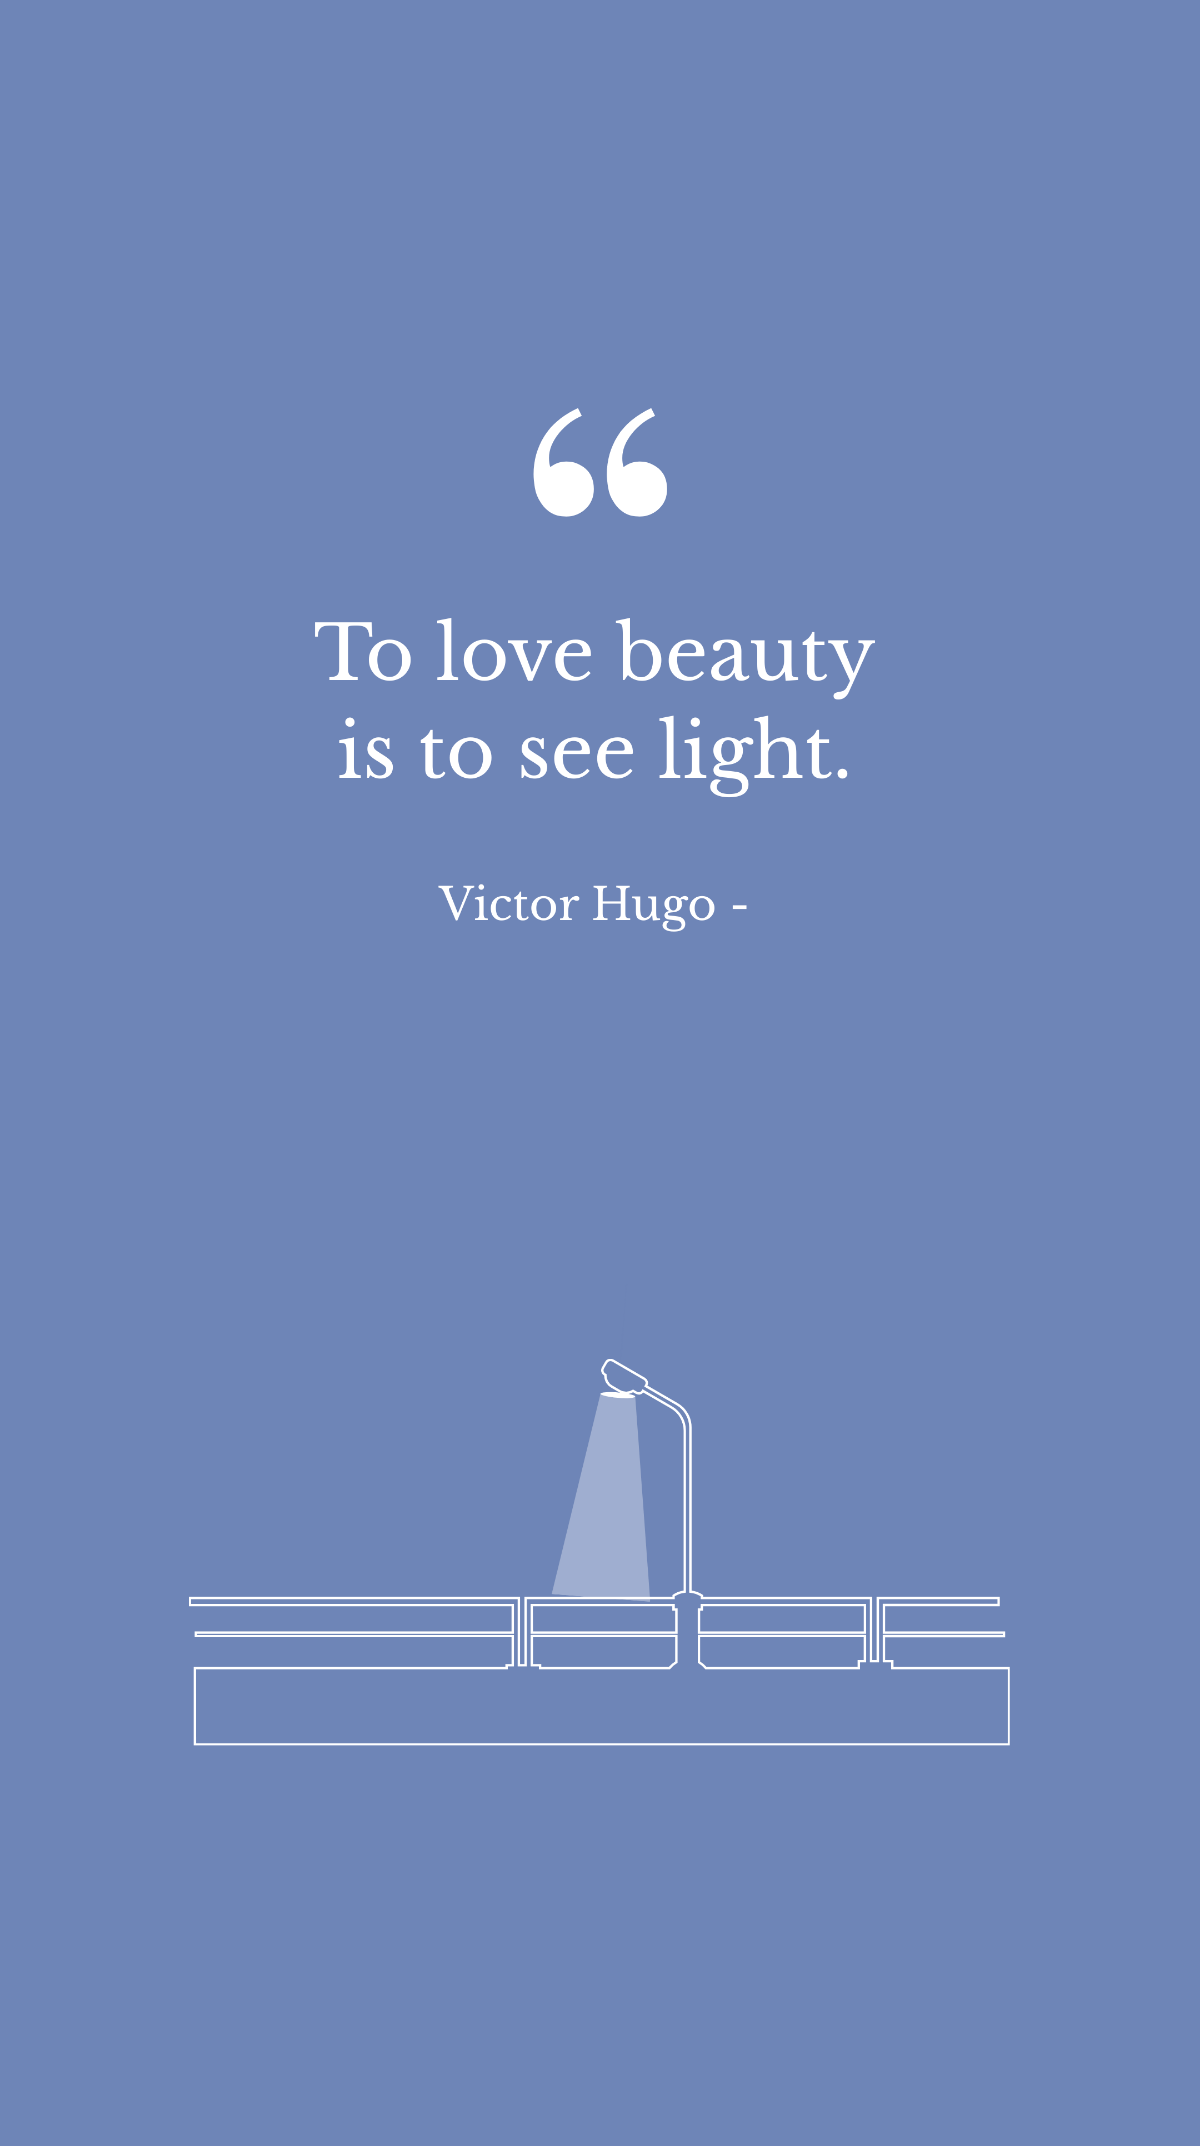 Free Victor Hugo - To love beauty is to see light. Template